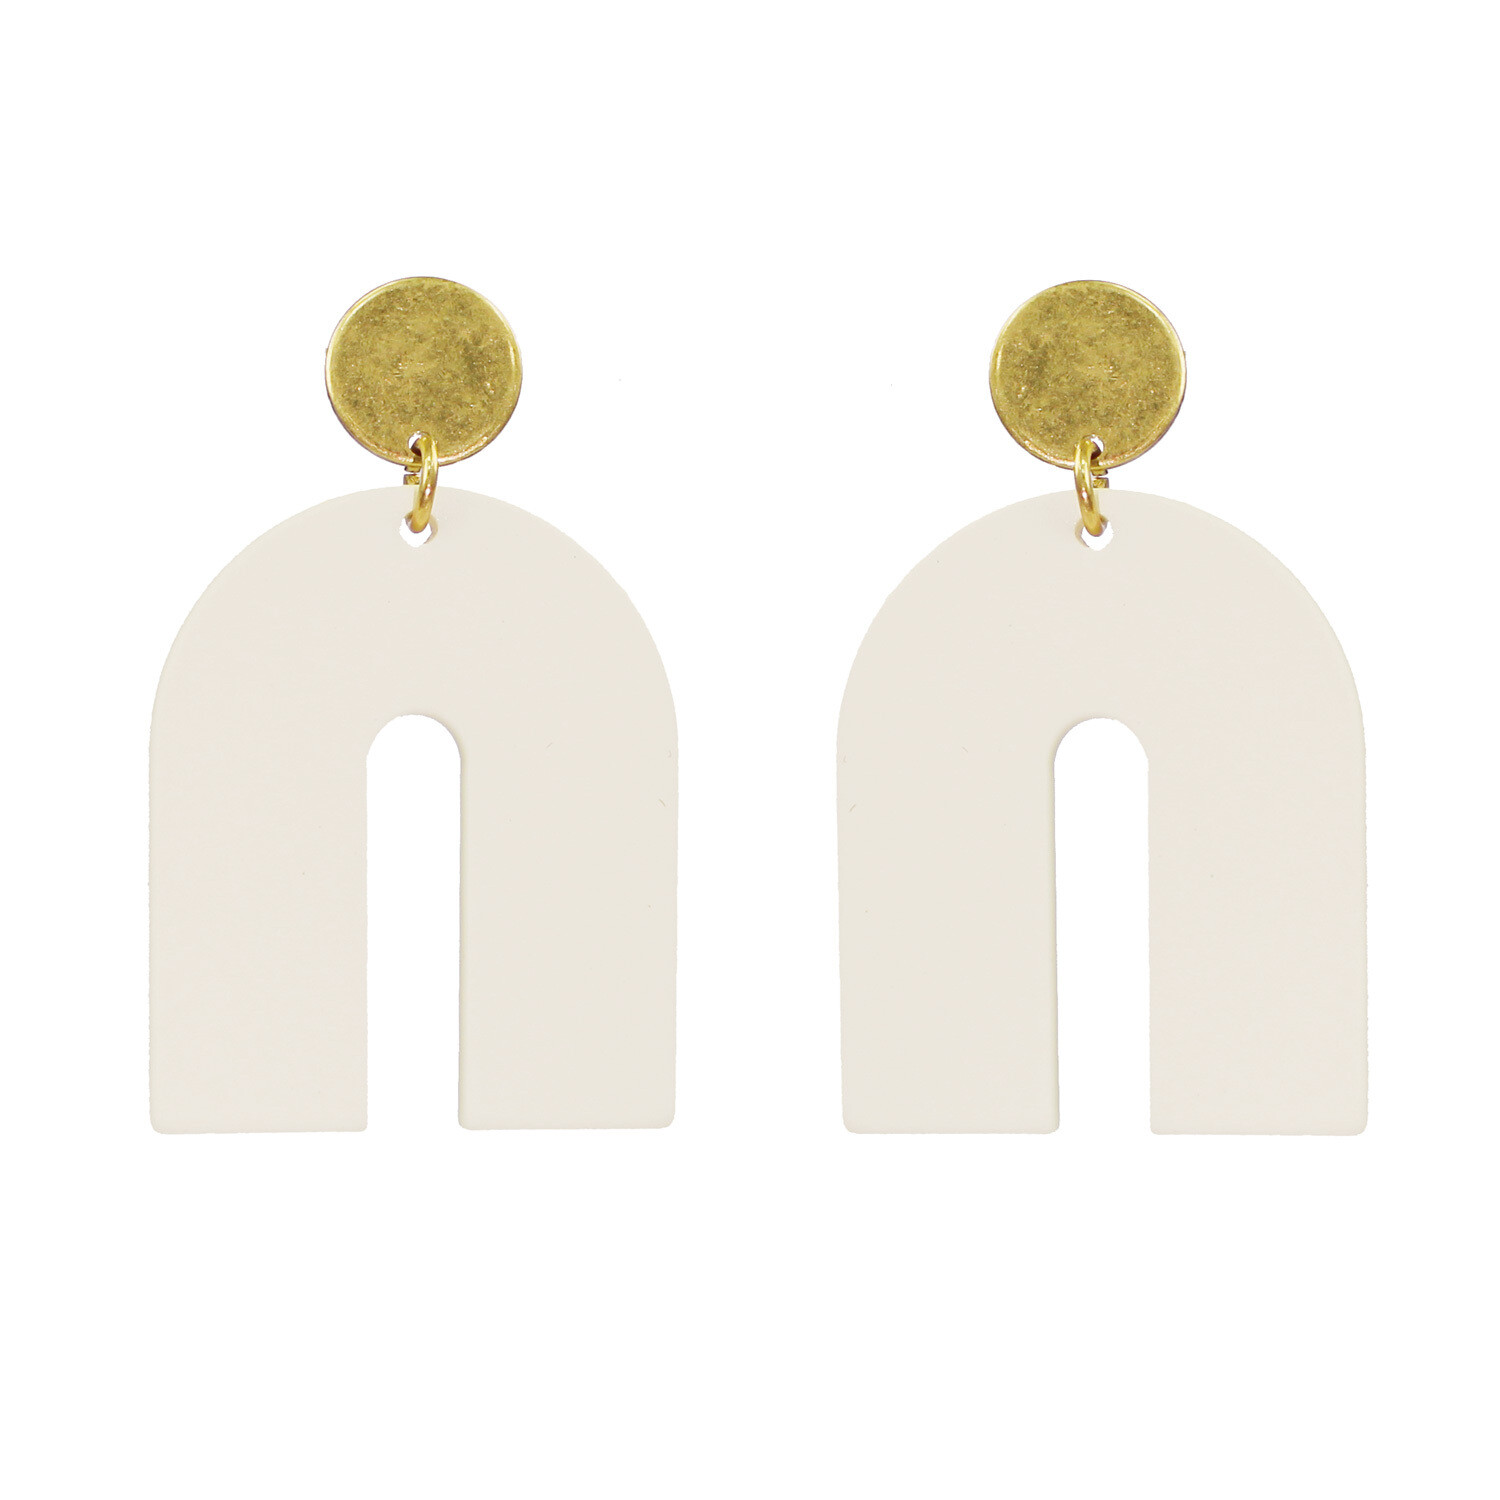 White Painted Arch Earrings